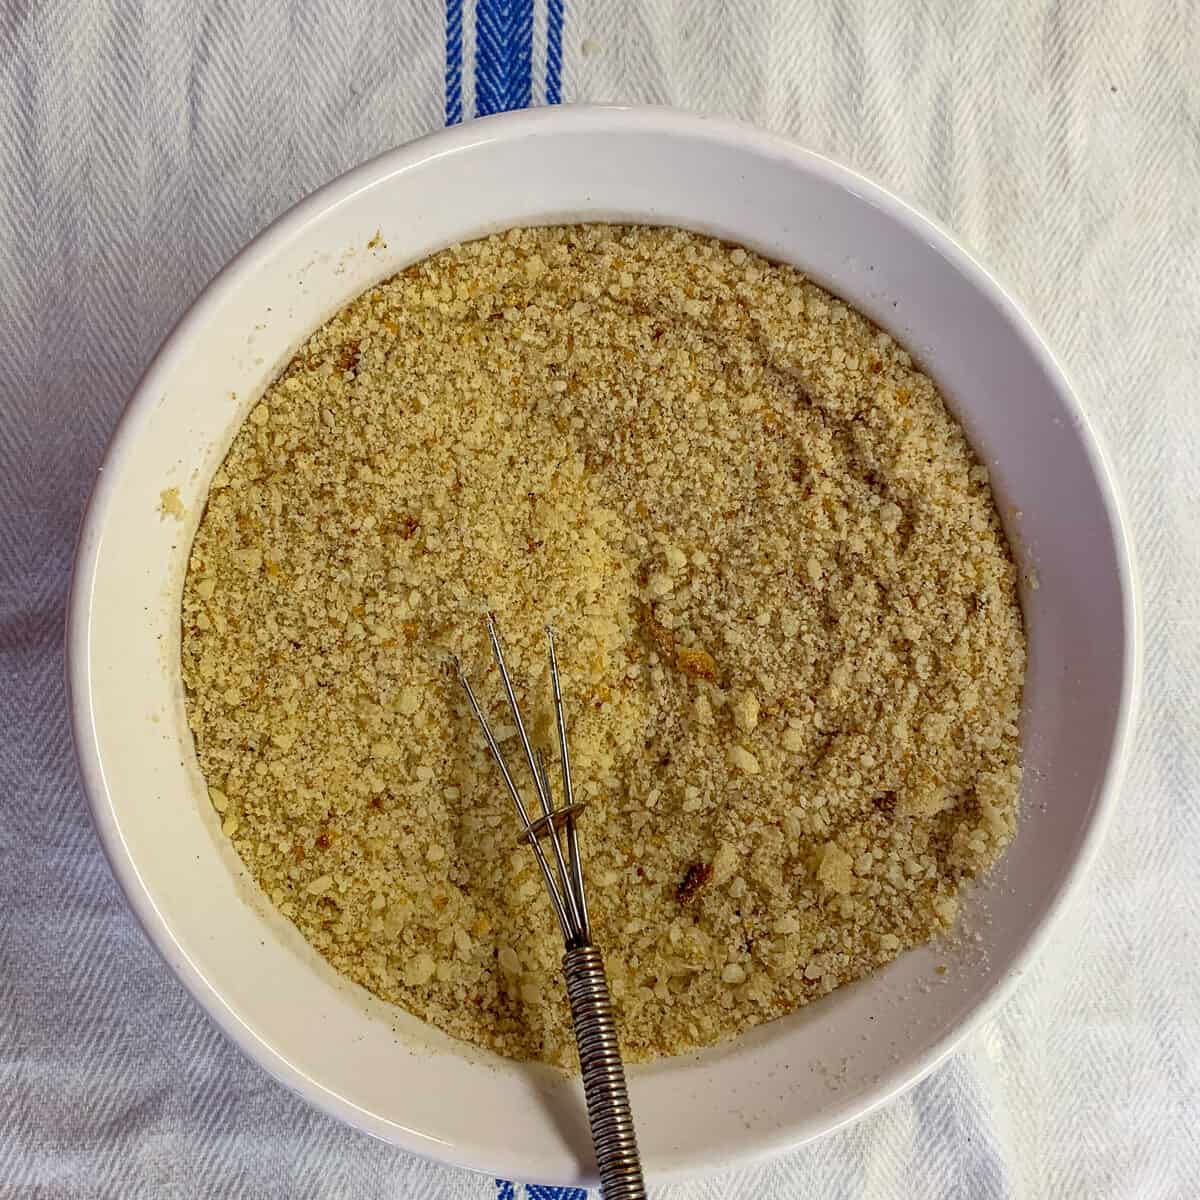 small bowl of breadcrumbs on white cloth